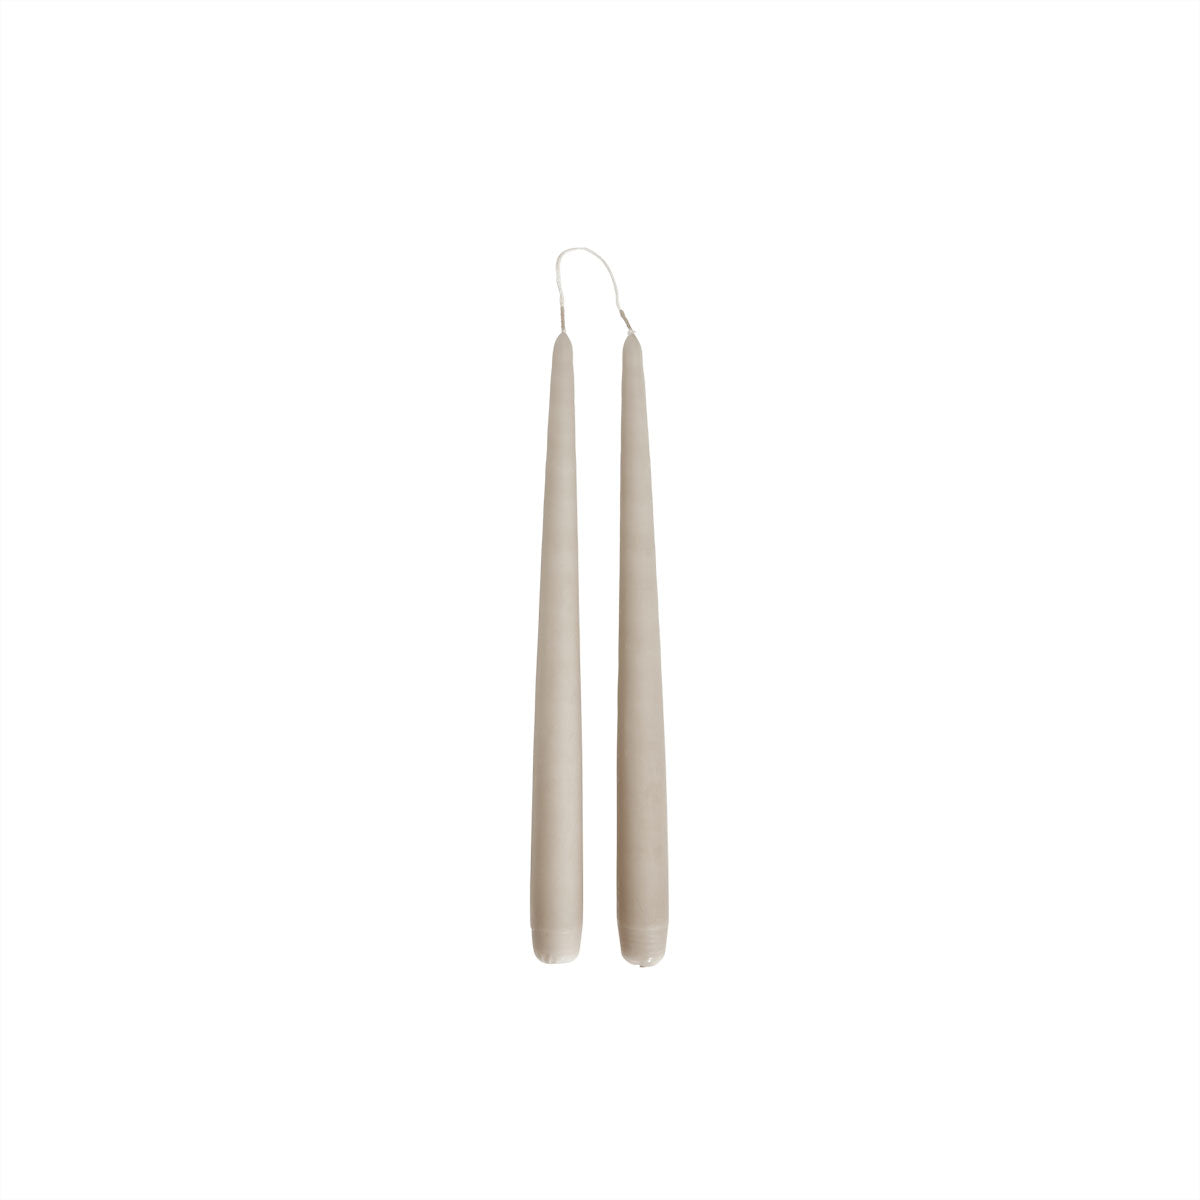 Indlæs billede i Gallery viewer, OYOY LIVING Fukai Candles - Medium - Pack of 2 Candle 306 Clay
